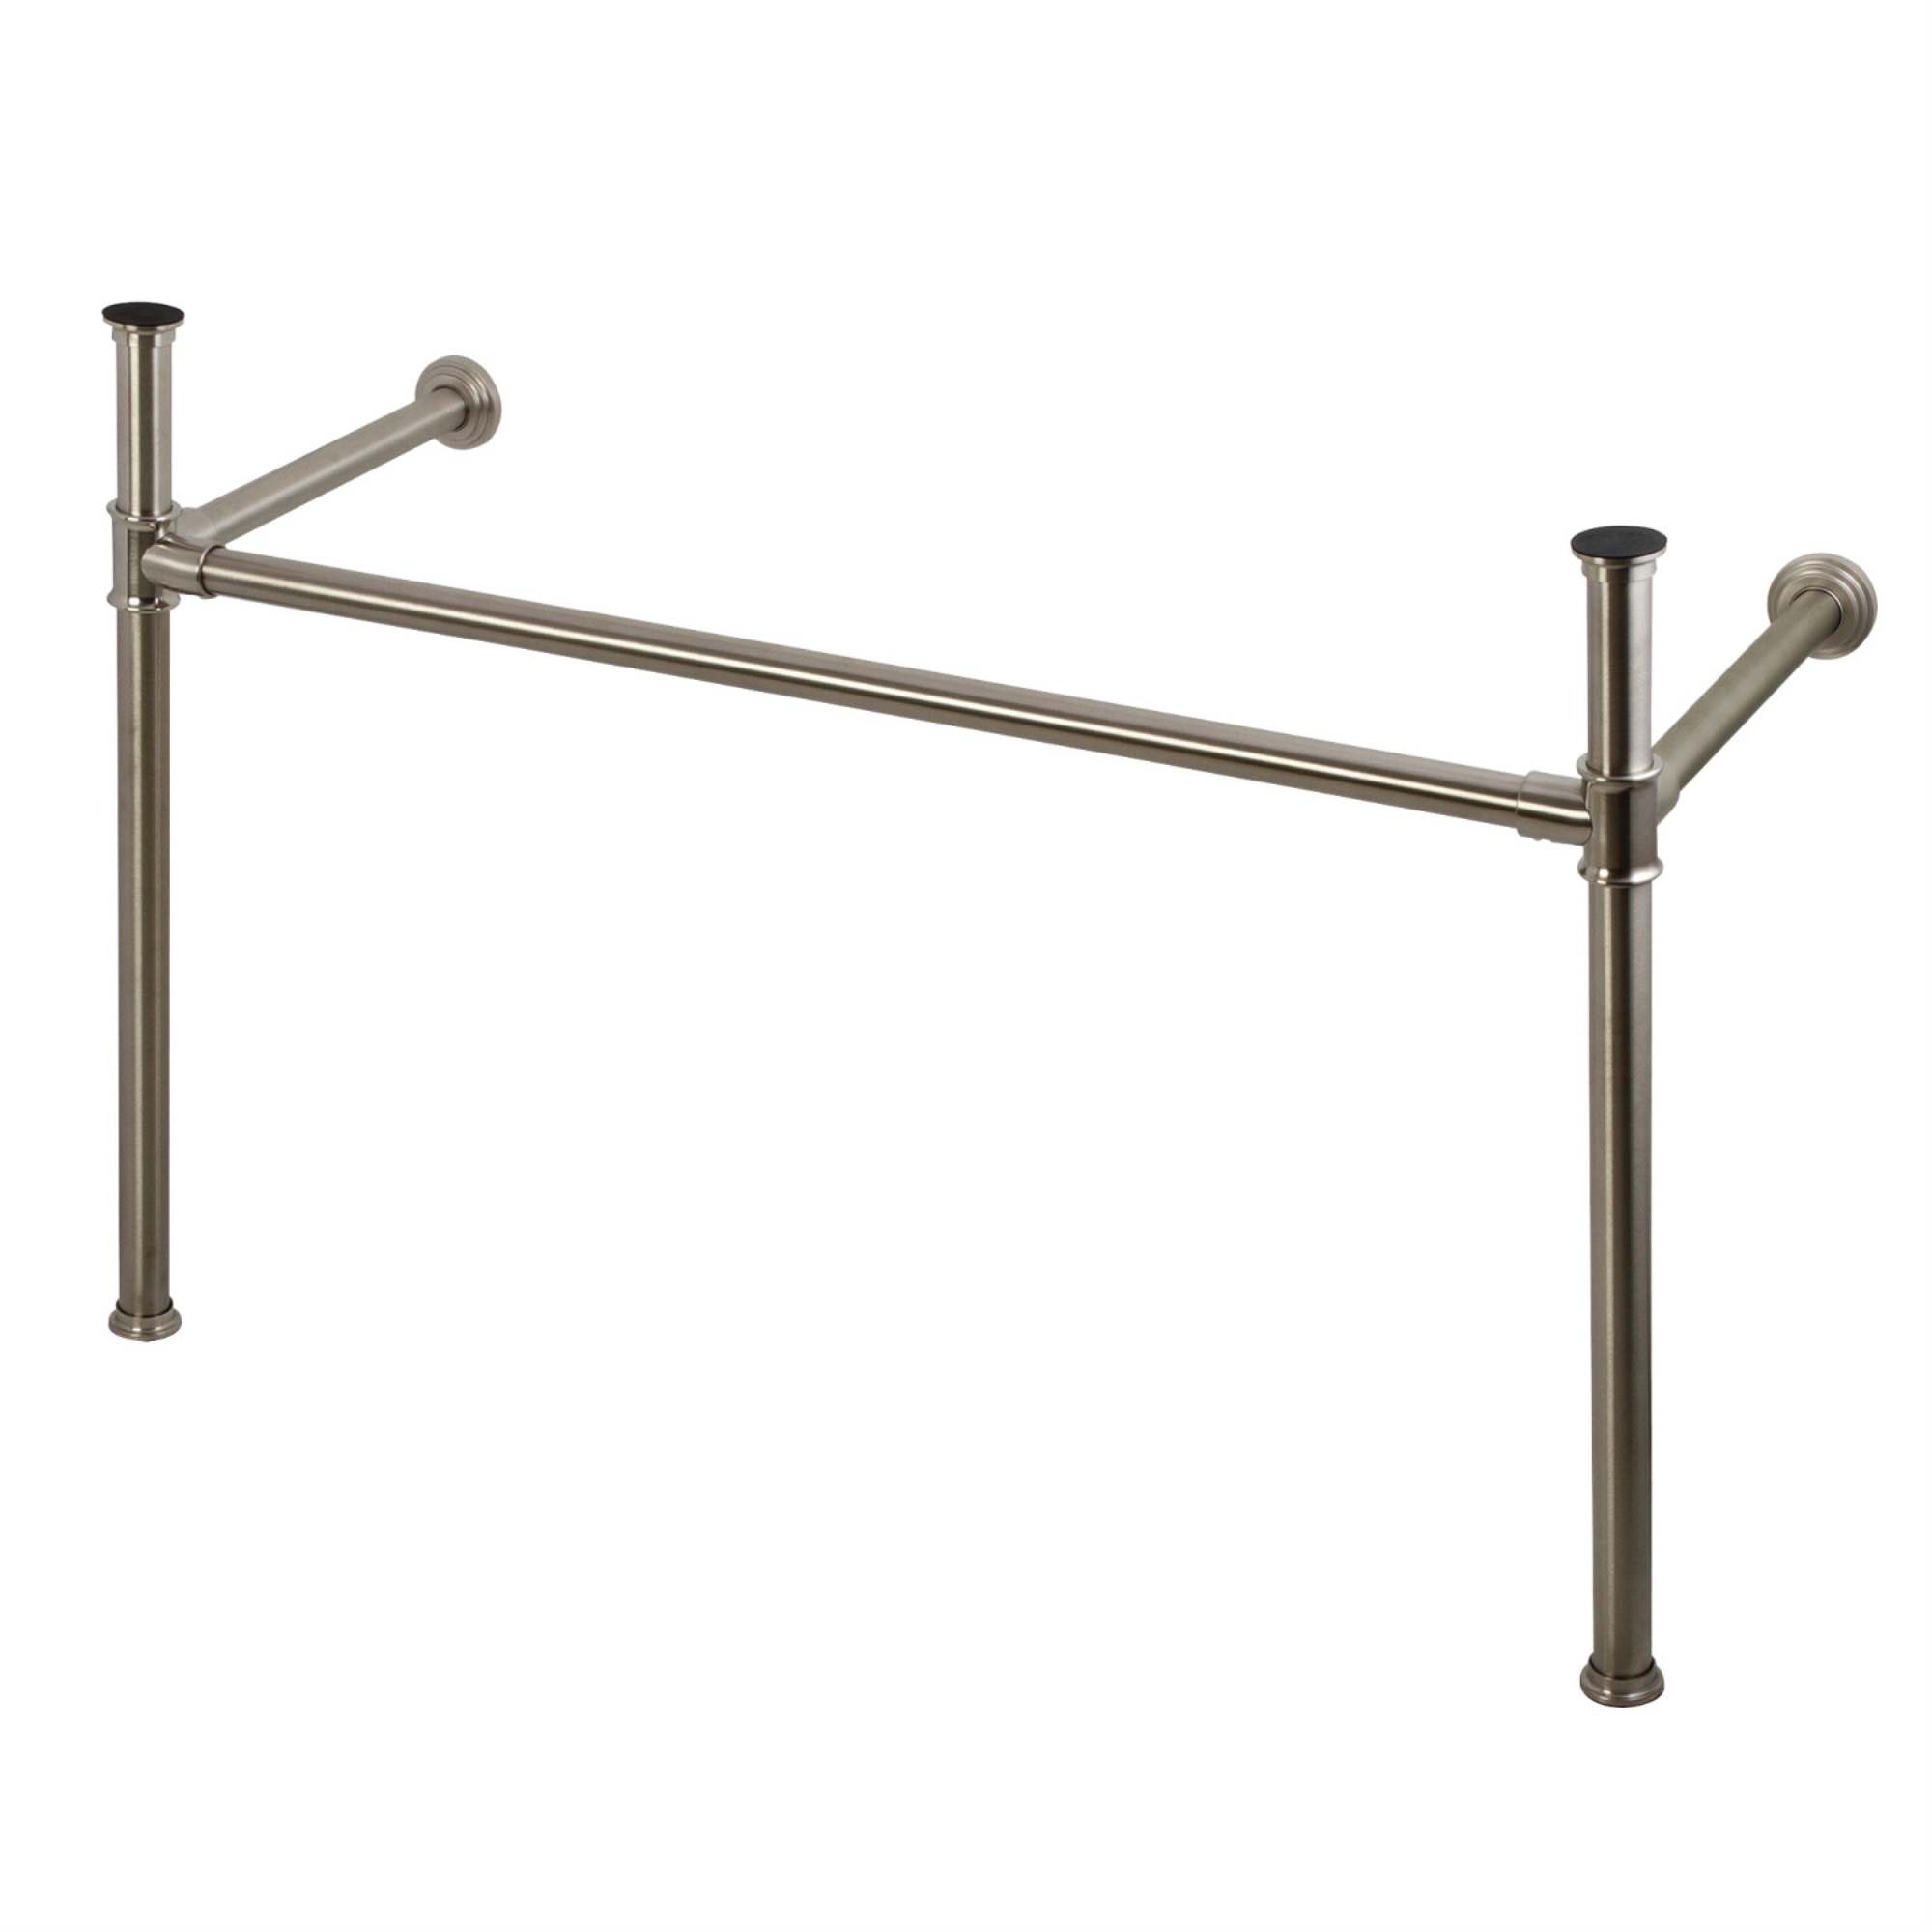 Fauceture VPB14888 Imperial Stainless Steel Console Legs for VPB1488B, Brushed Nickel